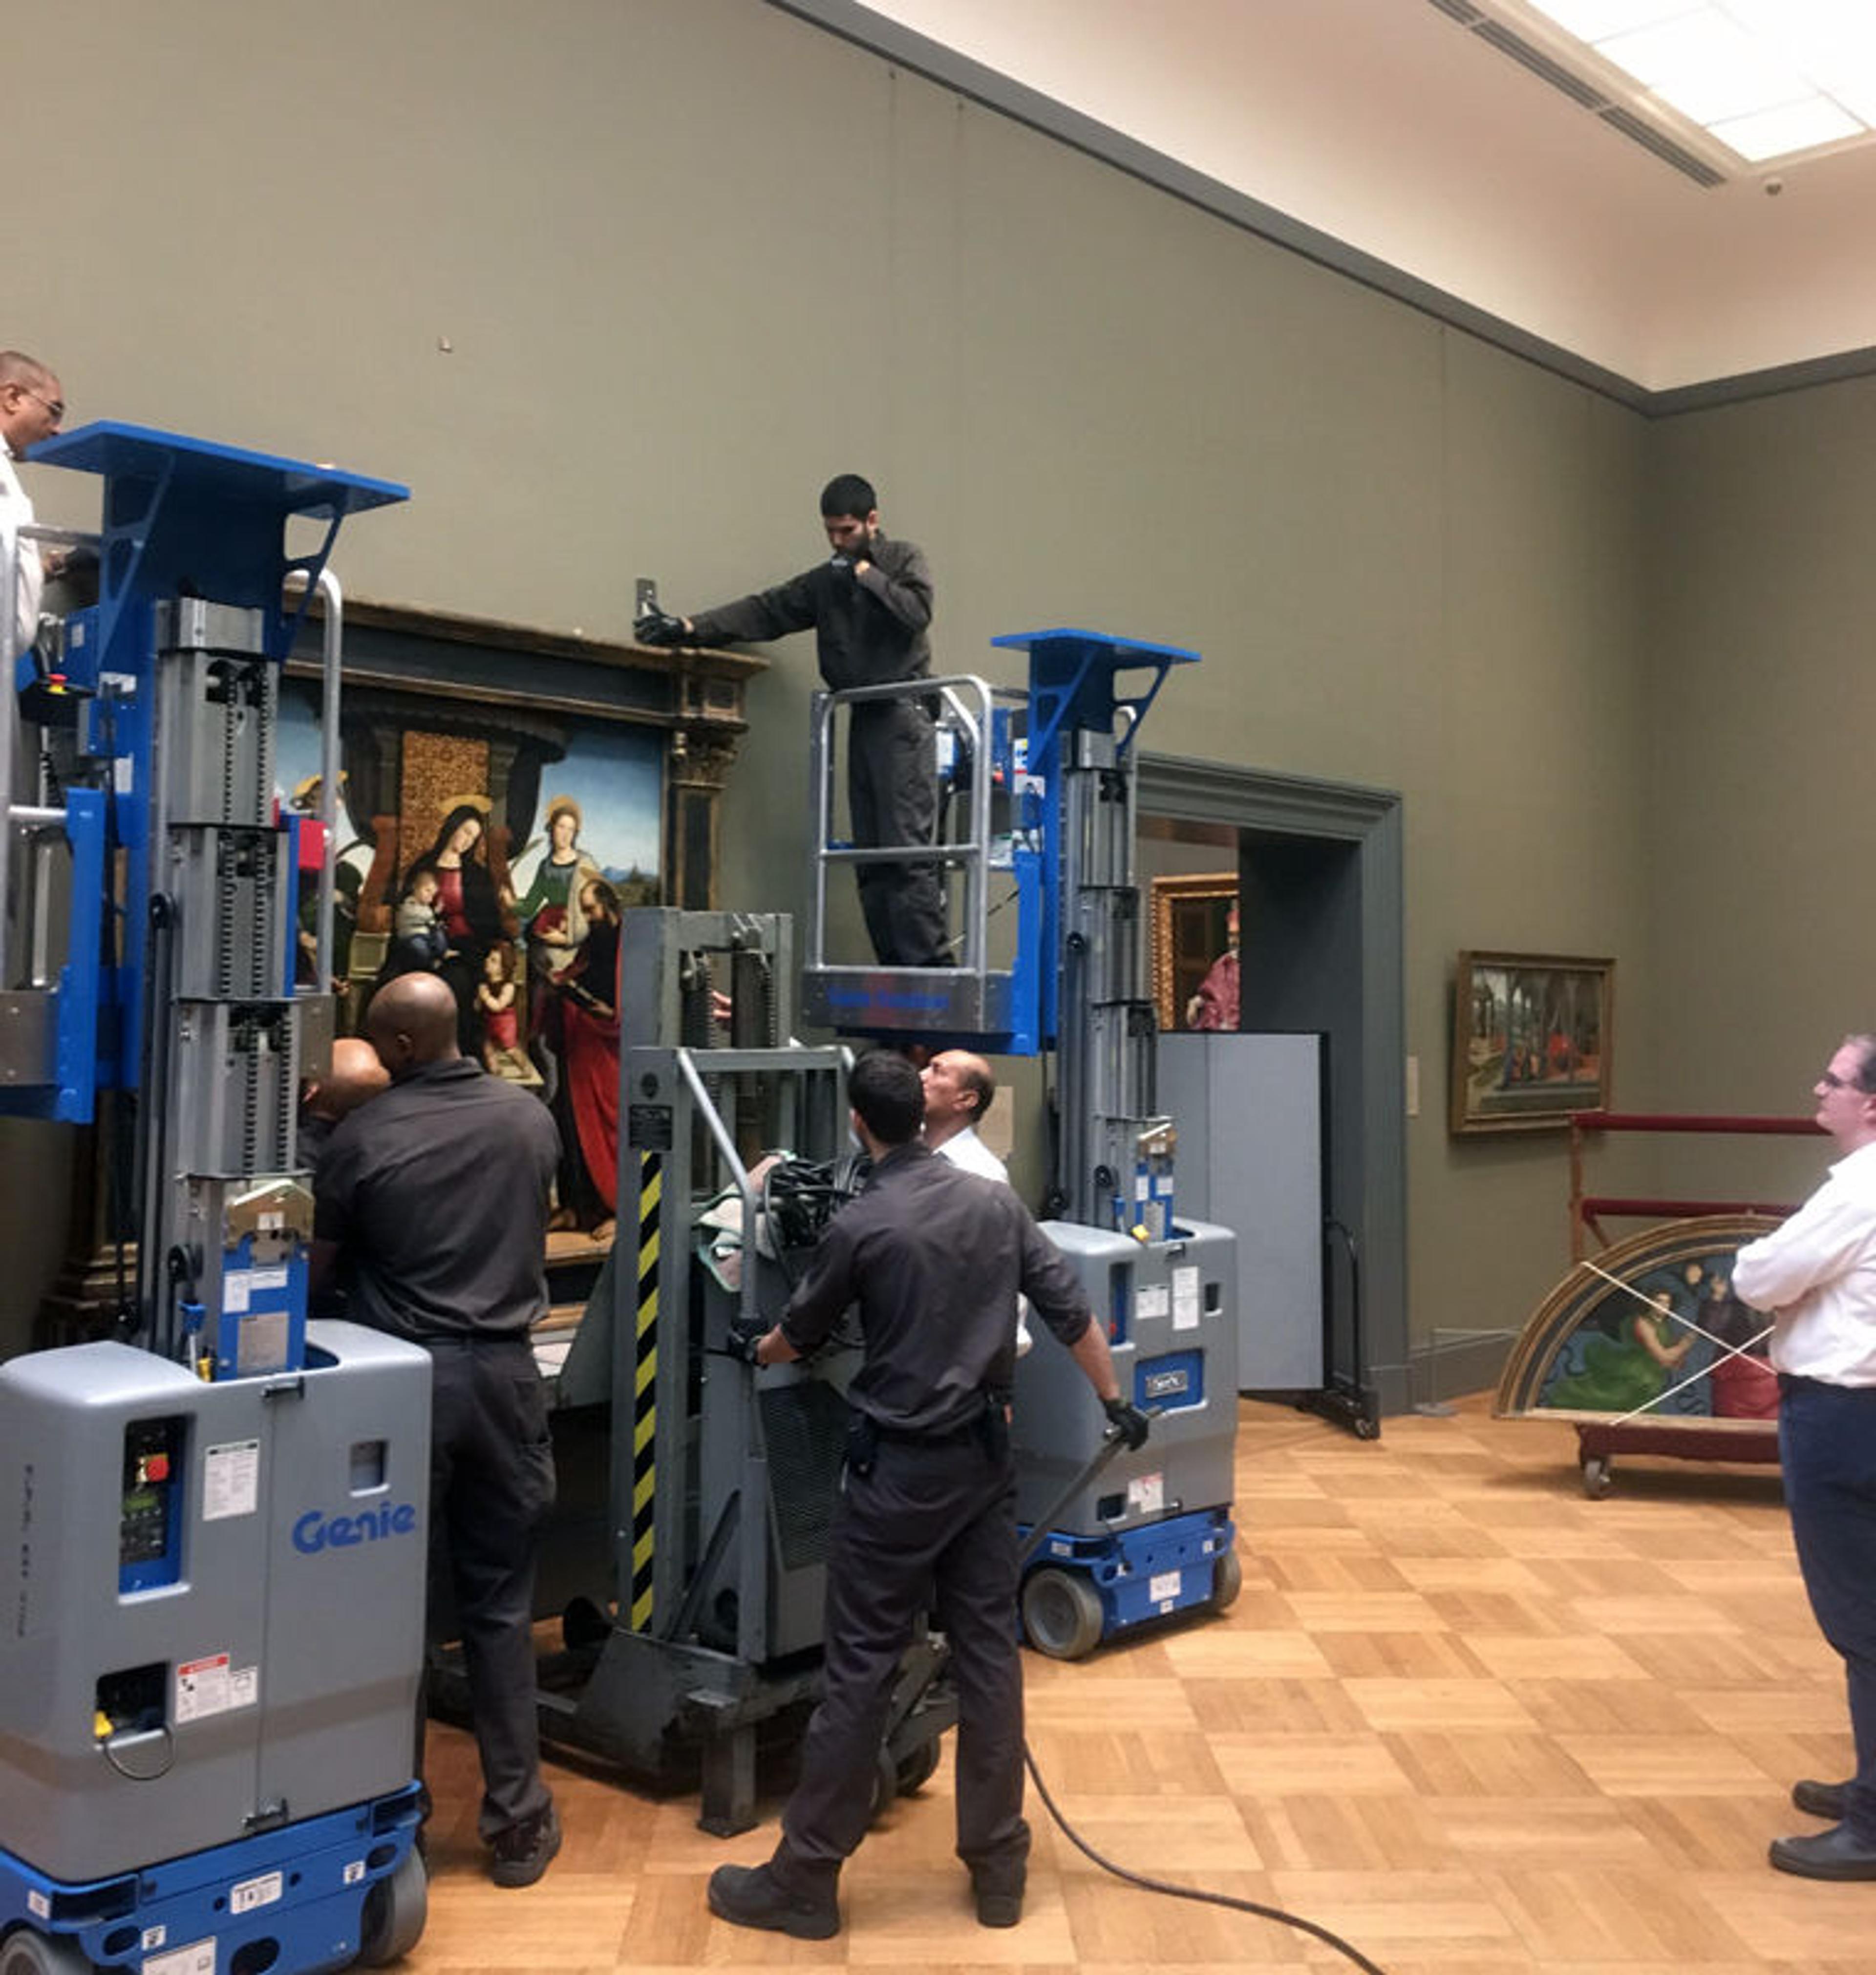 Museum staff move an altarpiece by Raphael in an art gallery